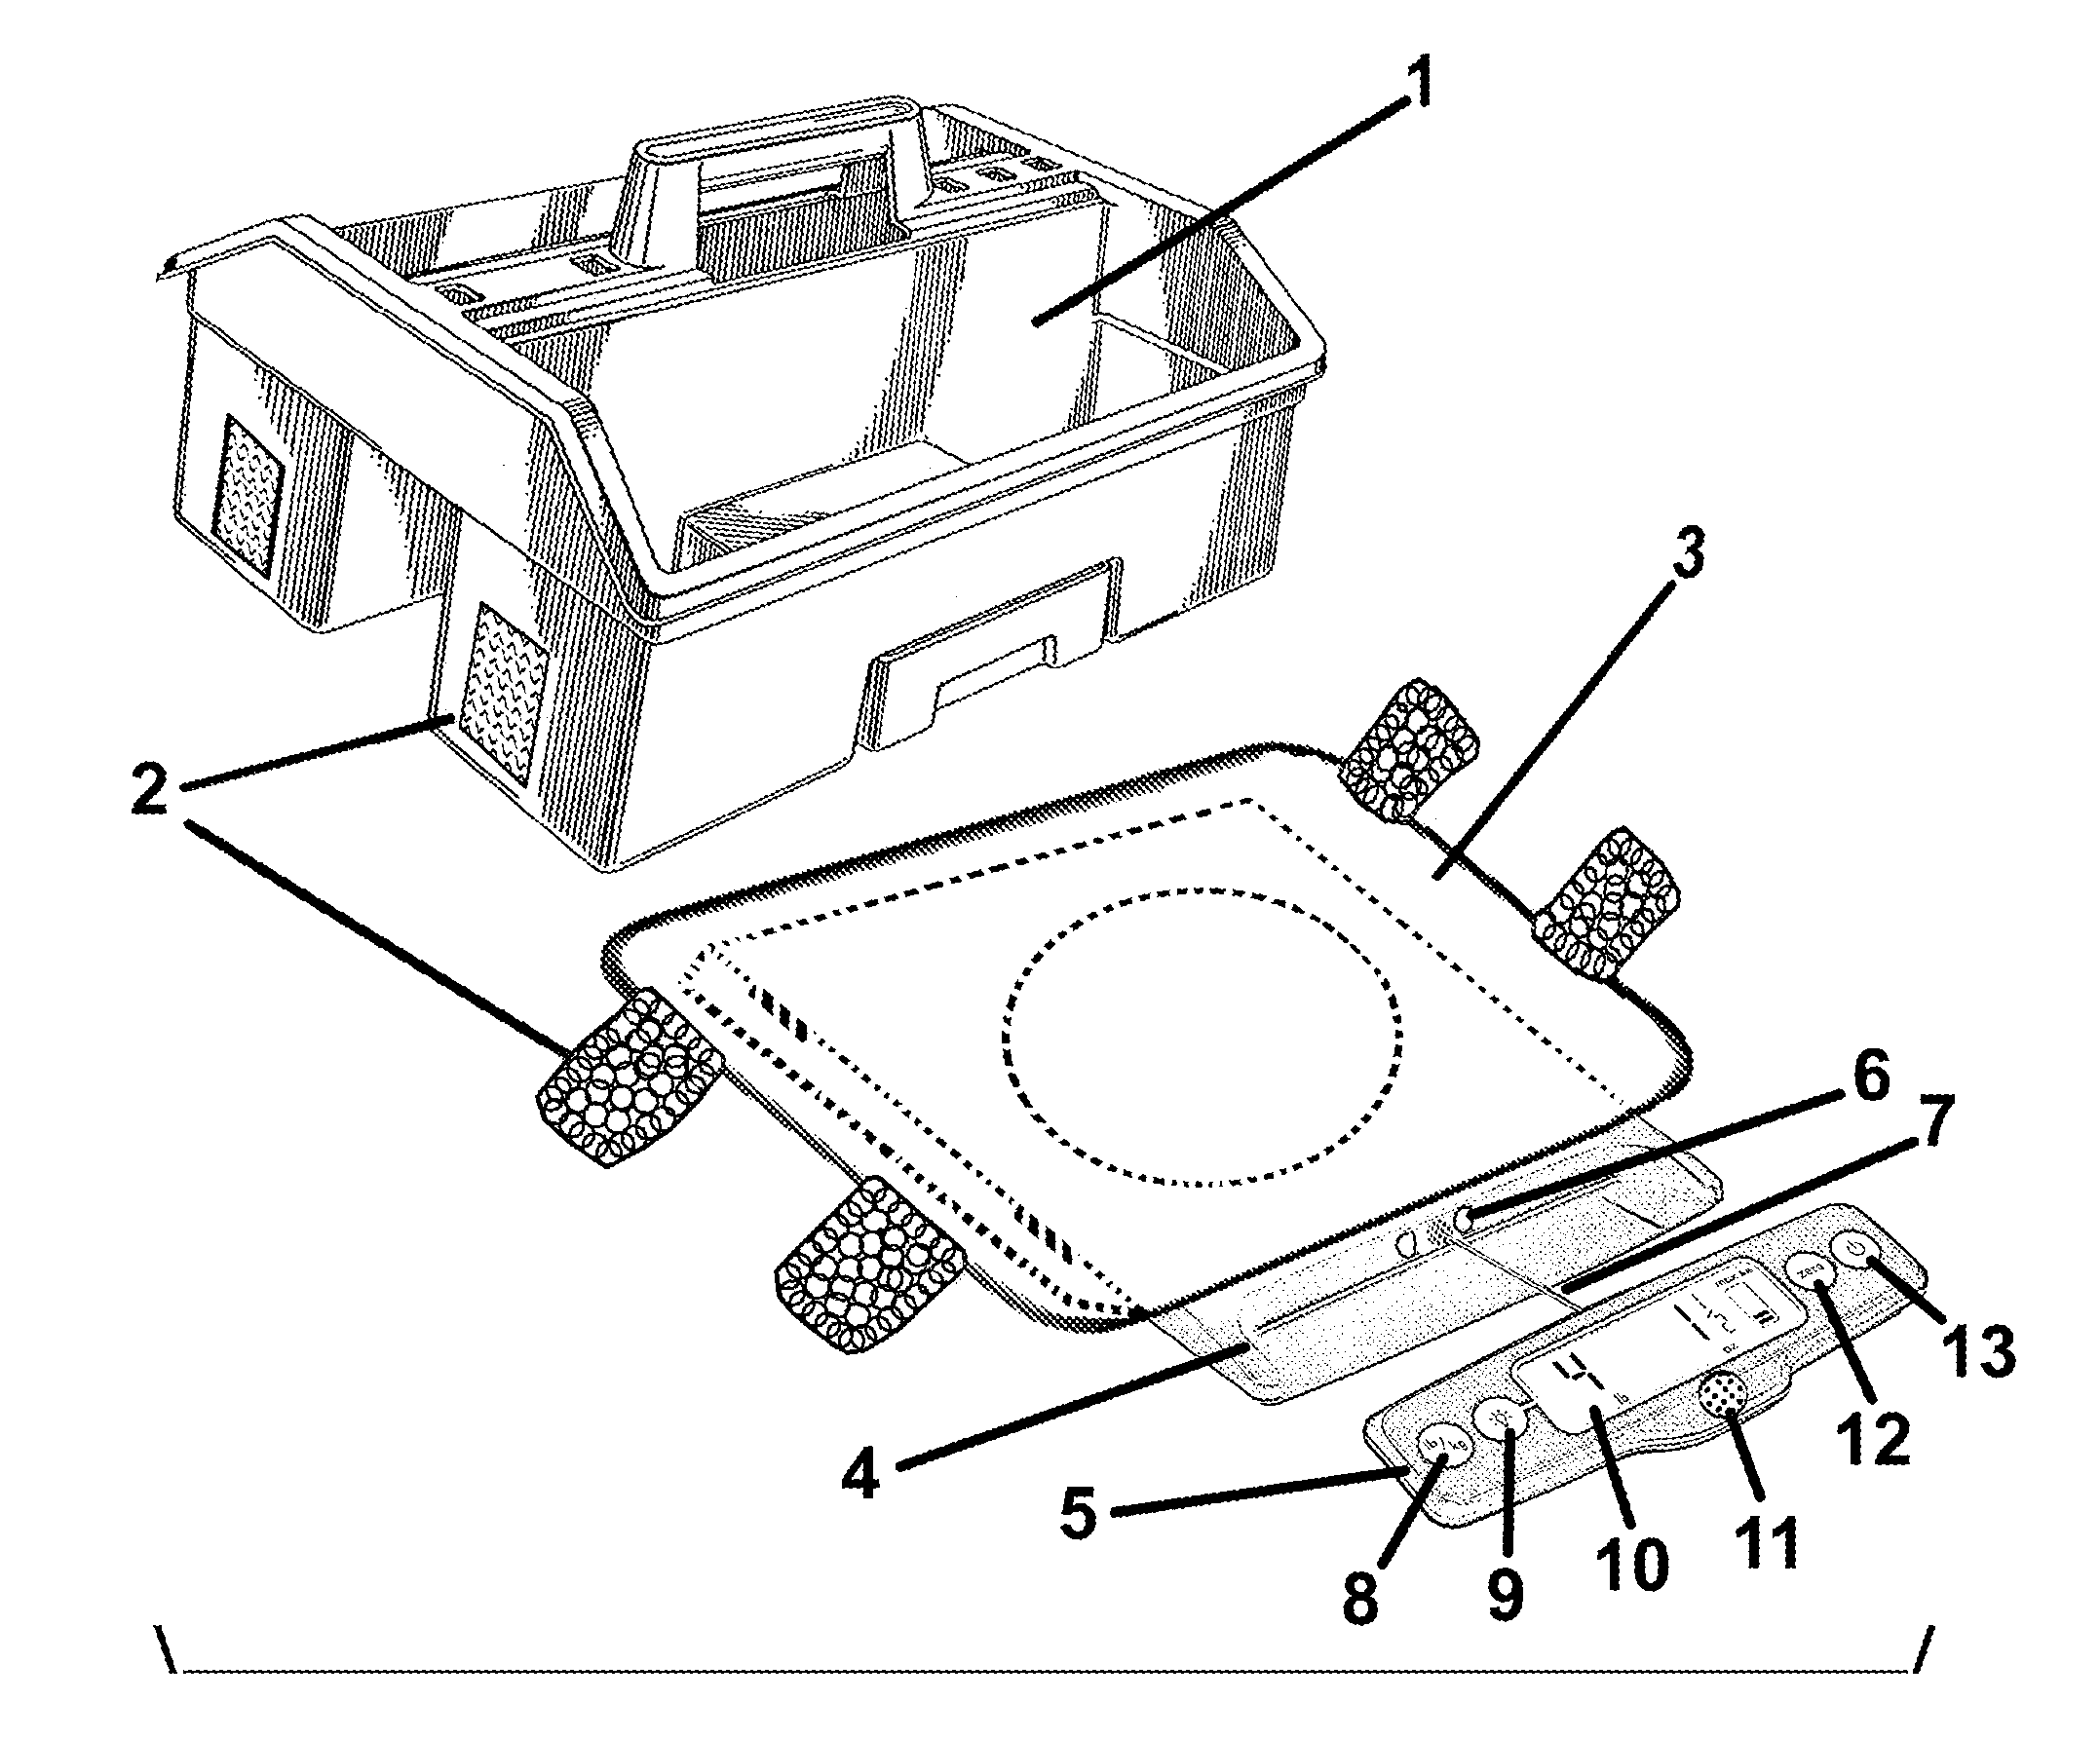 Portable memory scale with interchangeable tool carrier